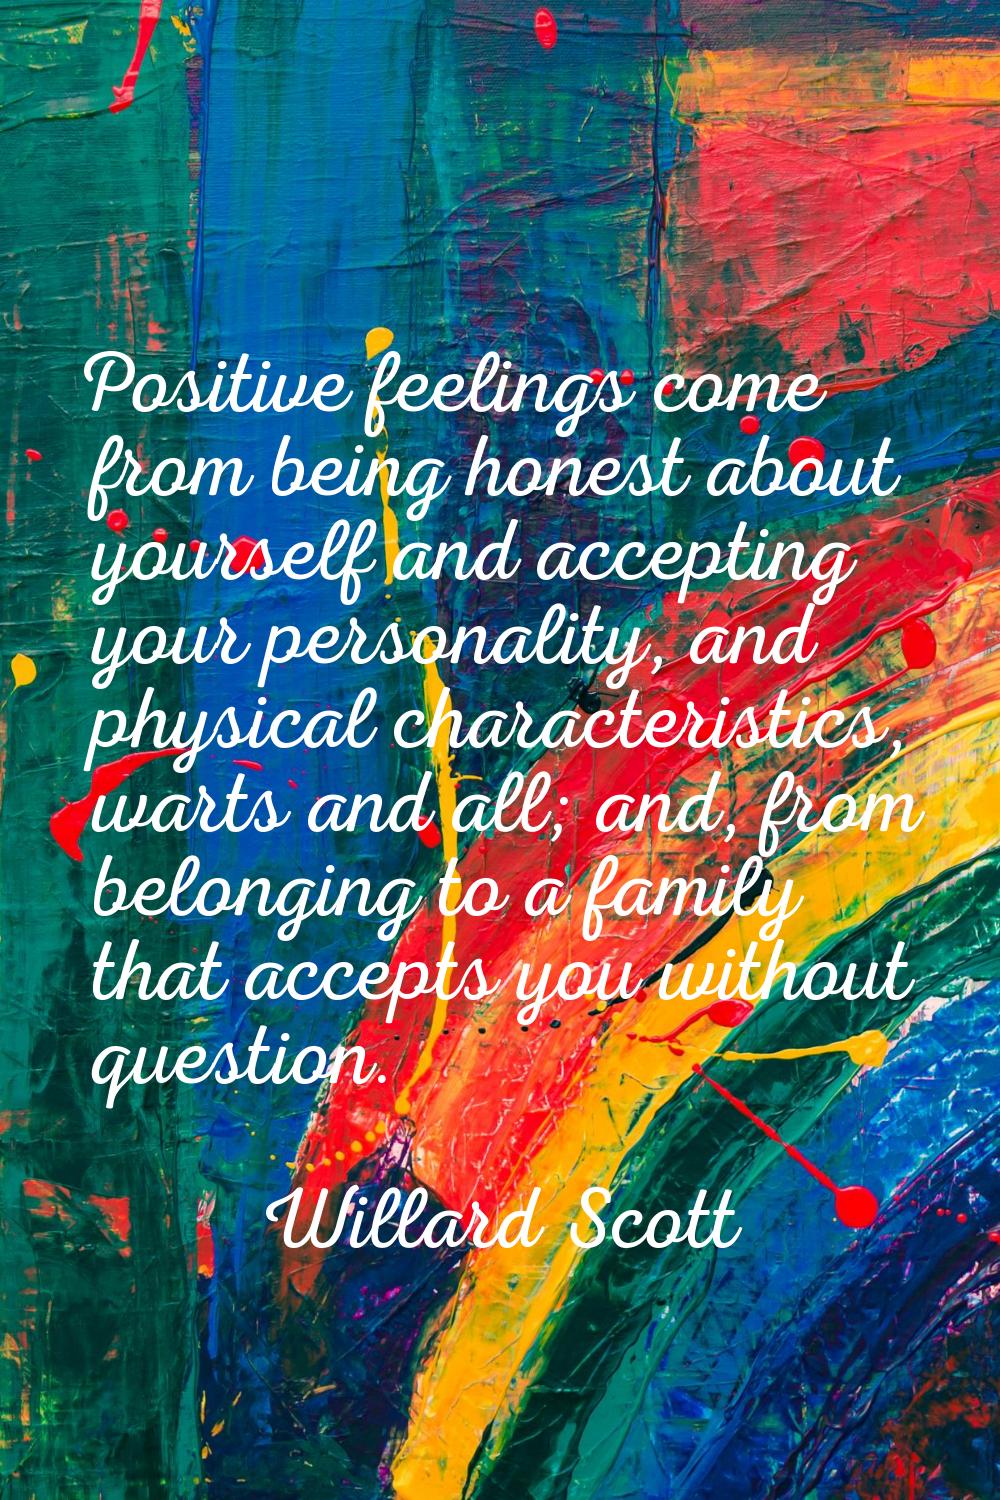 Positive feelings come from being honest about yourself and accepting your personality, and physica